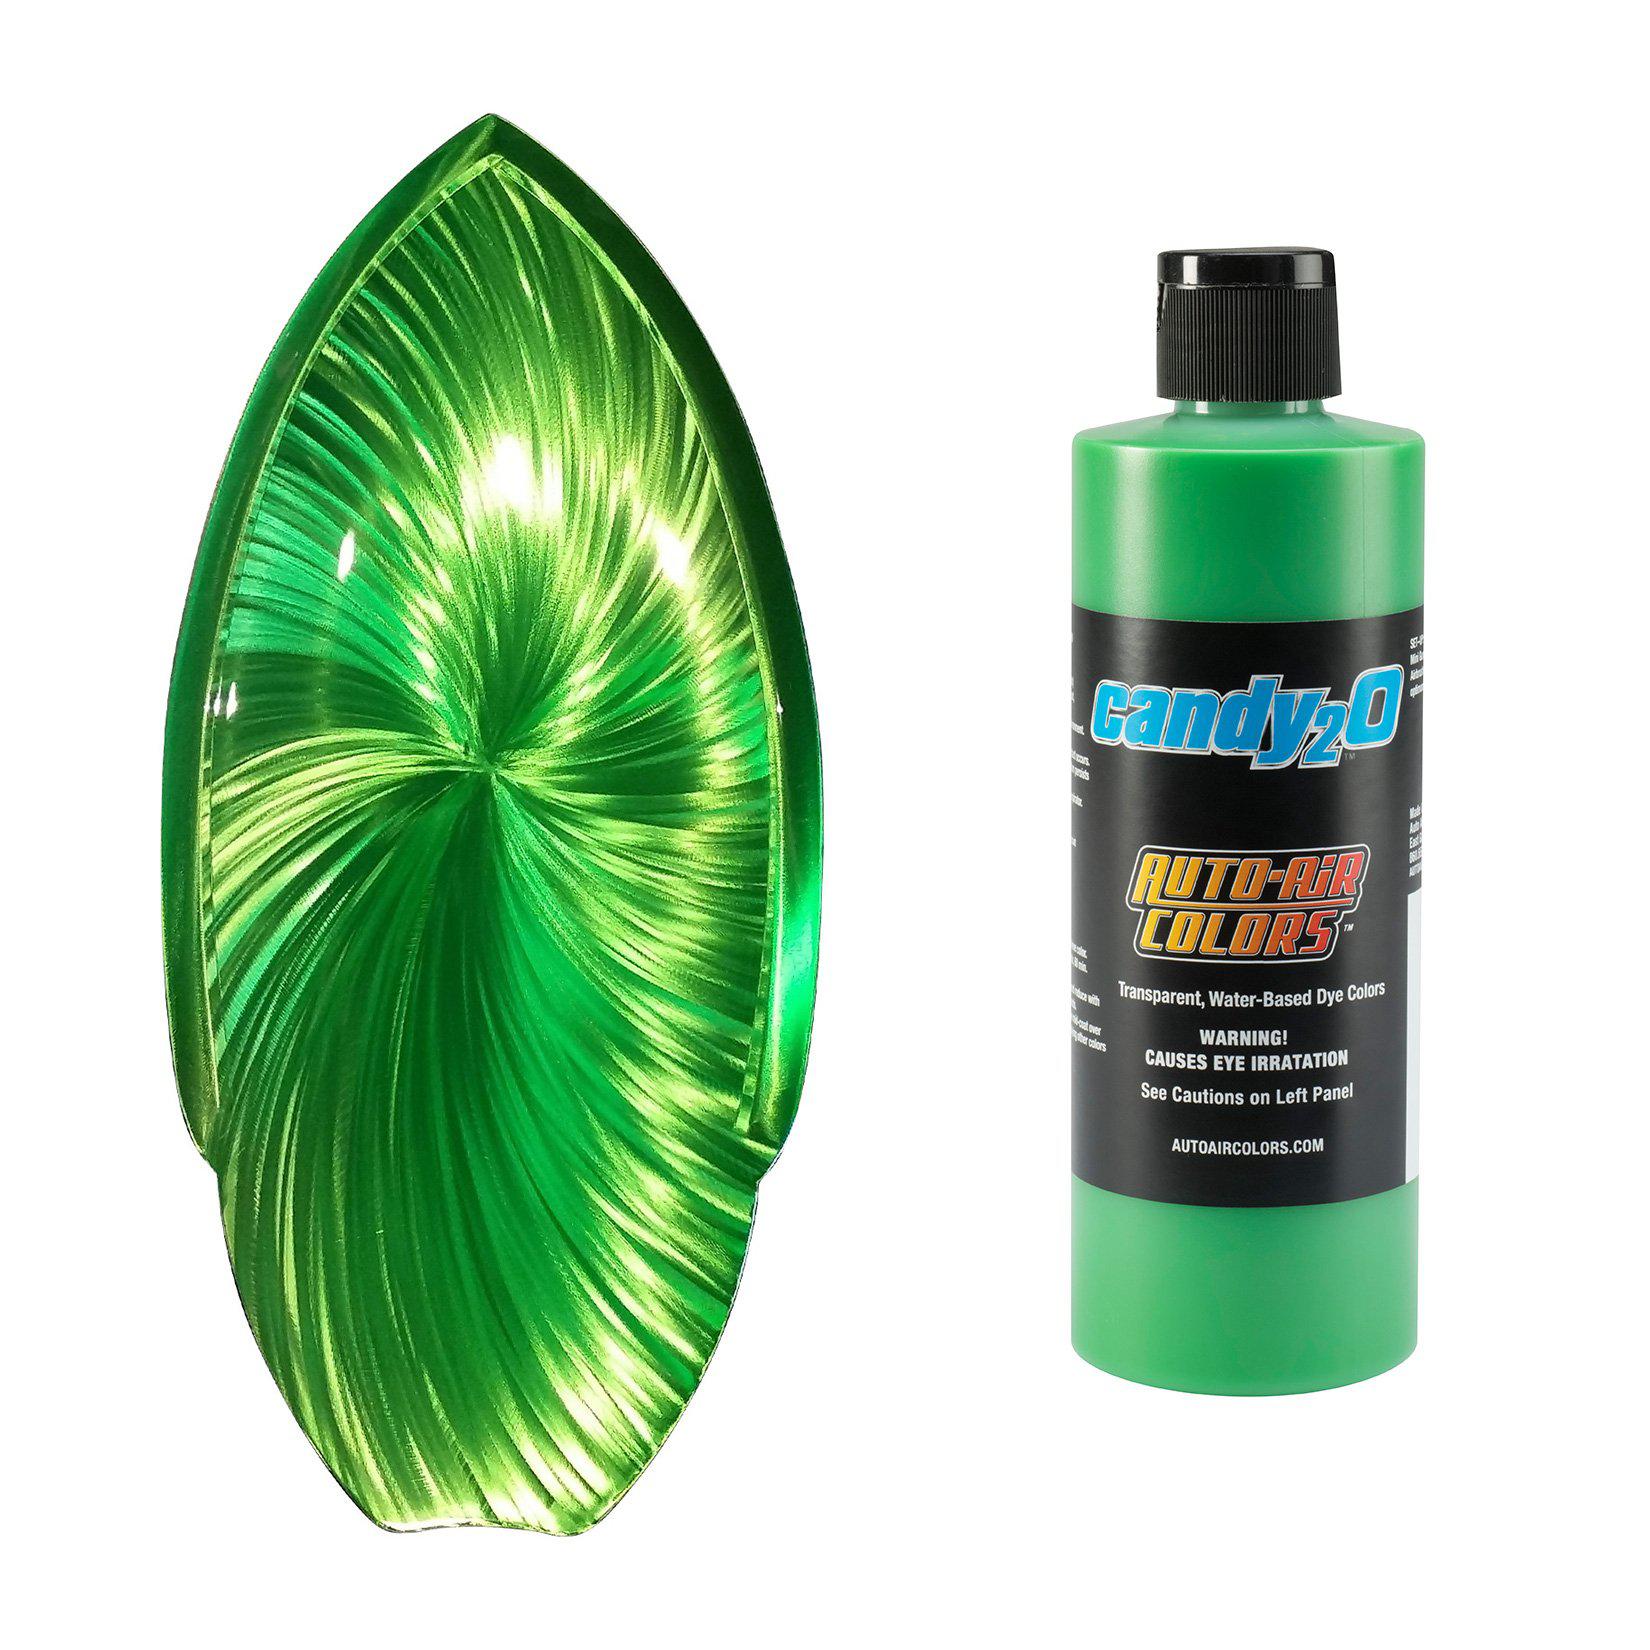 Auto-Air Candy createx auto-air colors candy2o poison green 4660 waterborne custom paints